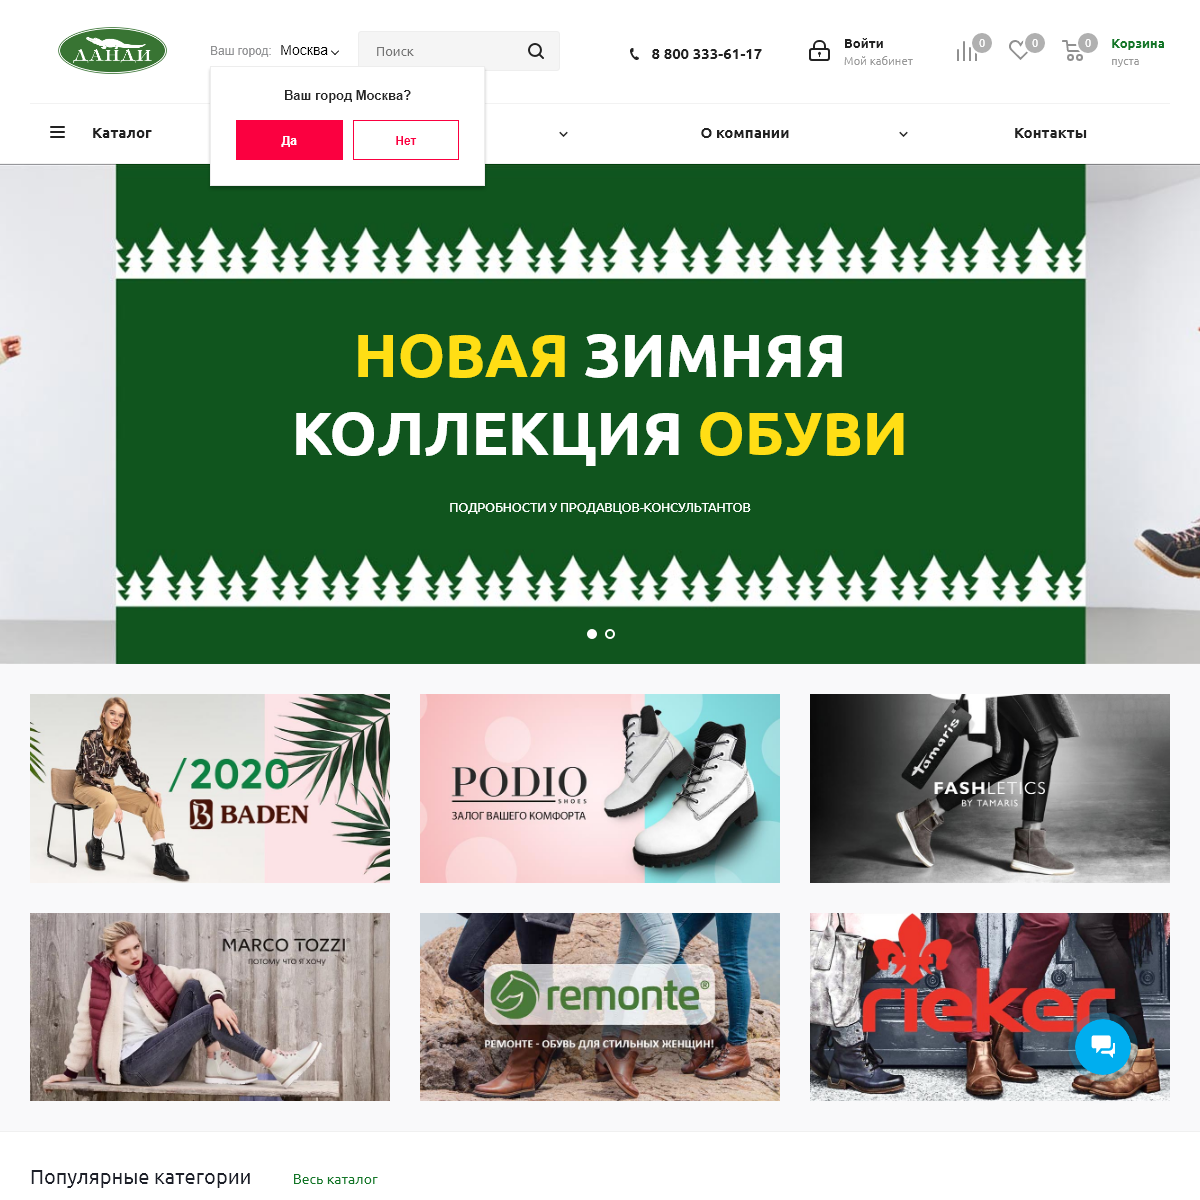 A complete backup of dandy-shoes.ru